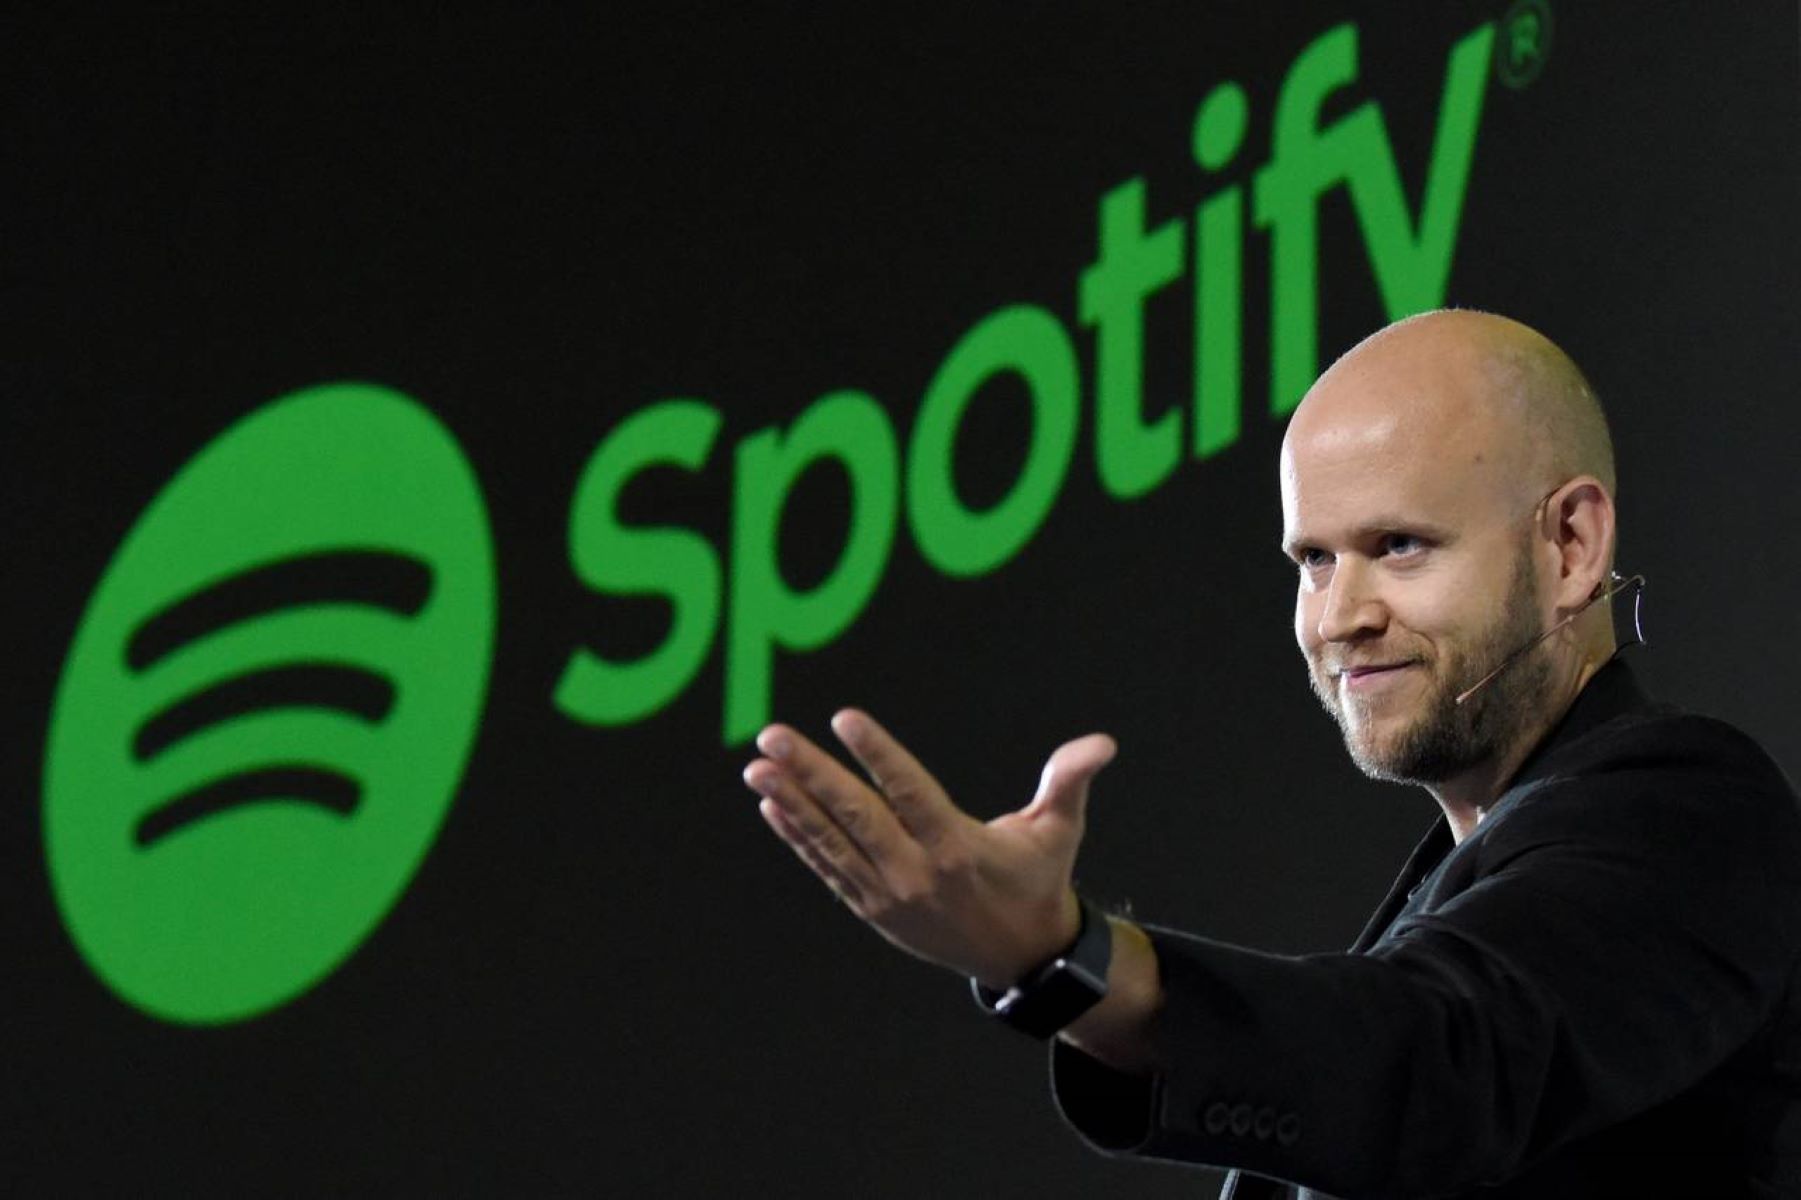 Spotify Founder Daniel Ek Reflects On The Success Of “Discover Weekly” Playlist And The Power Of Listening